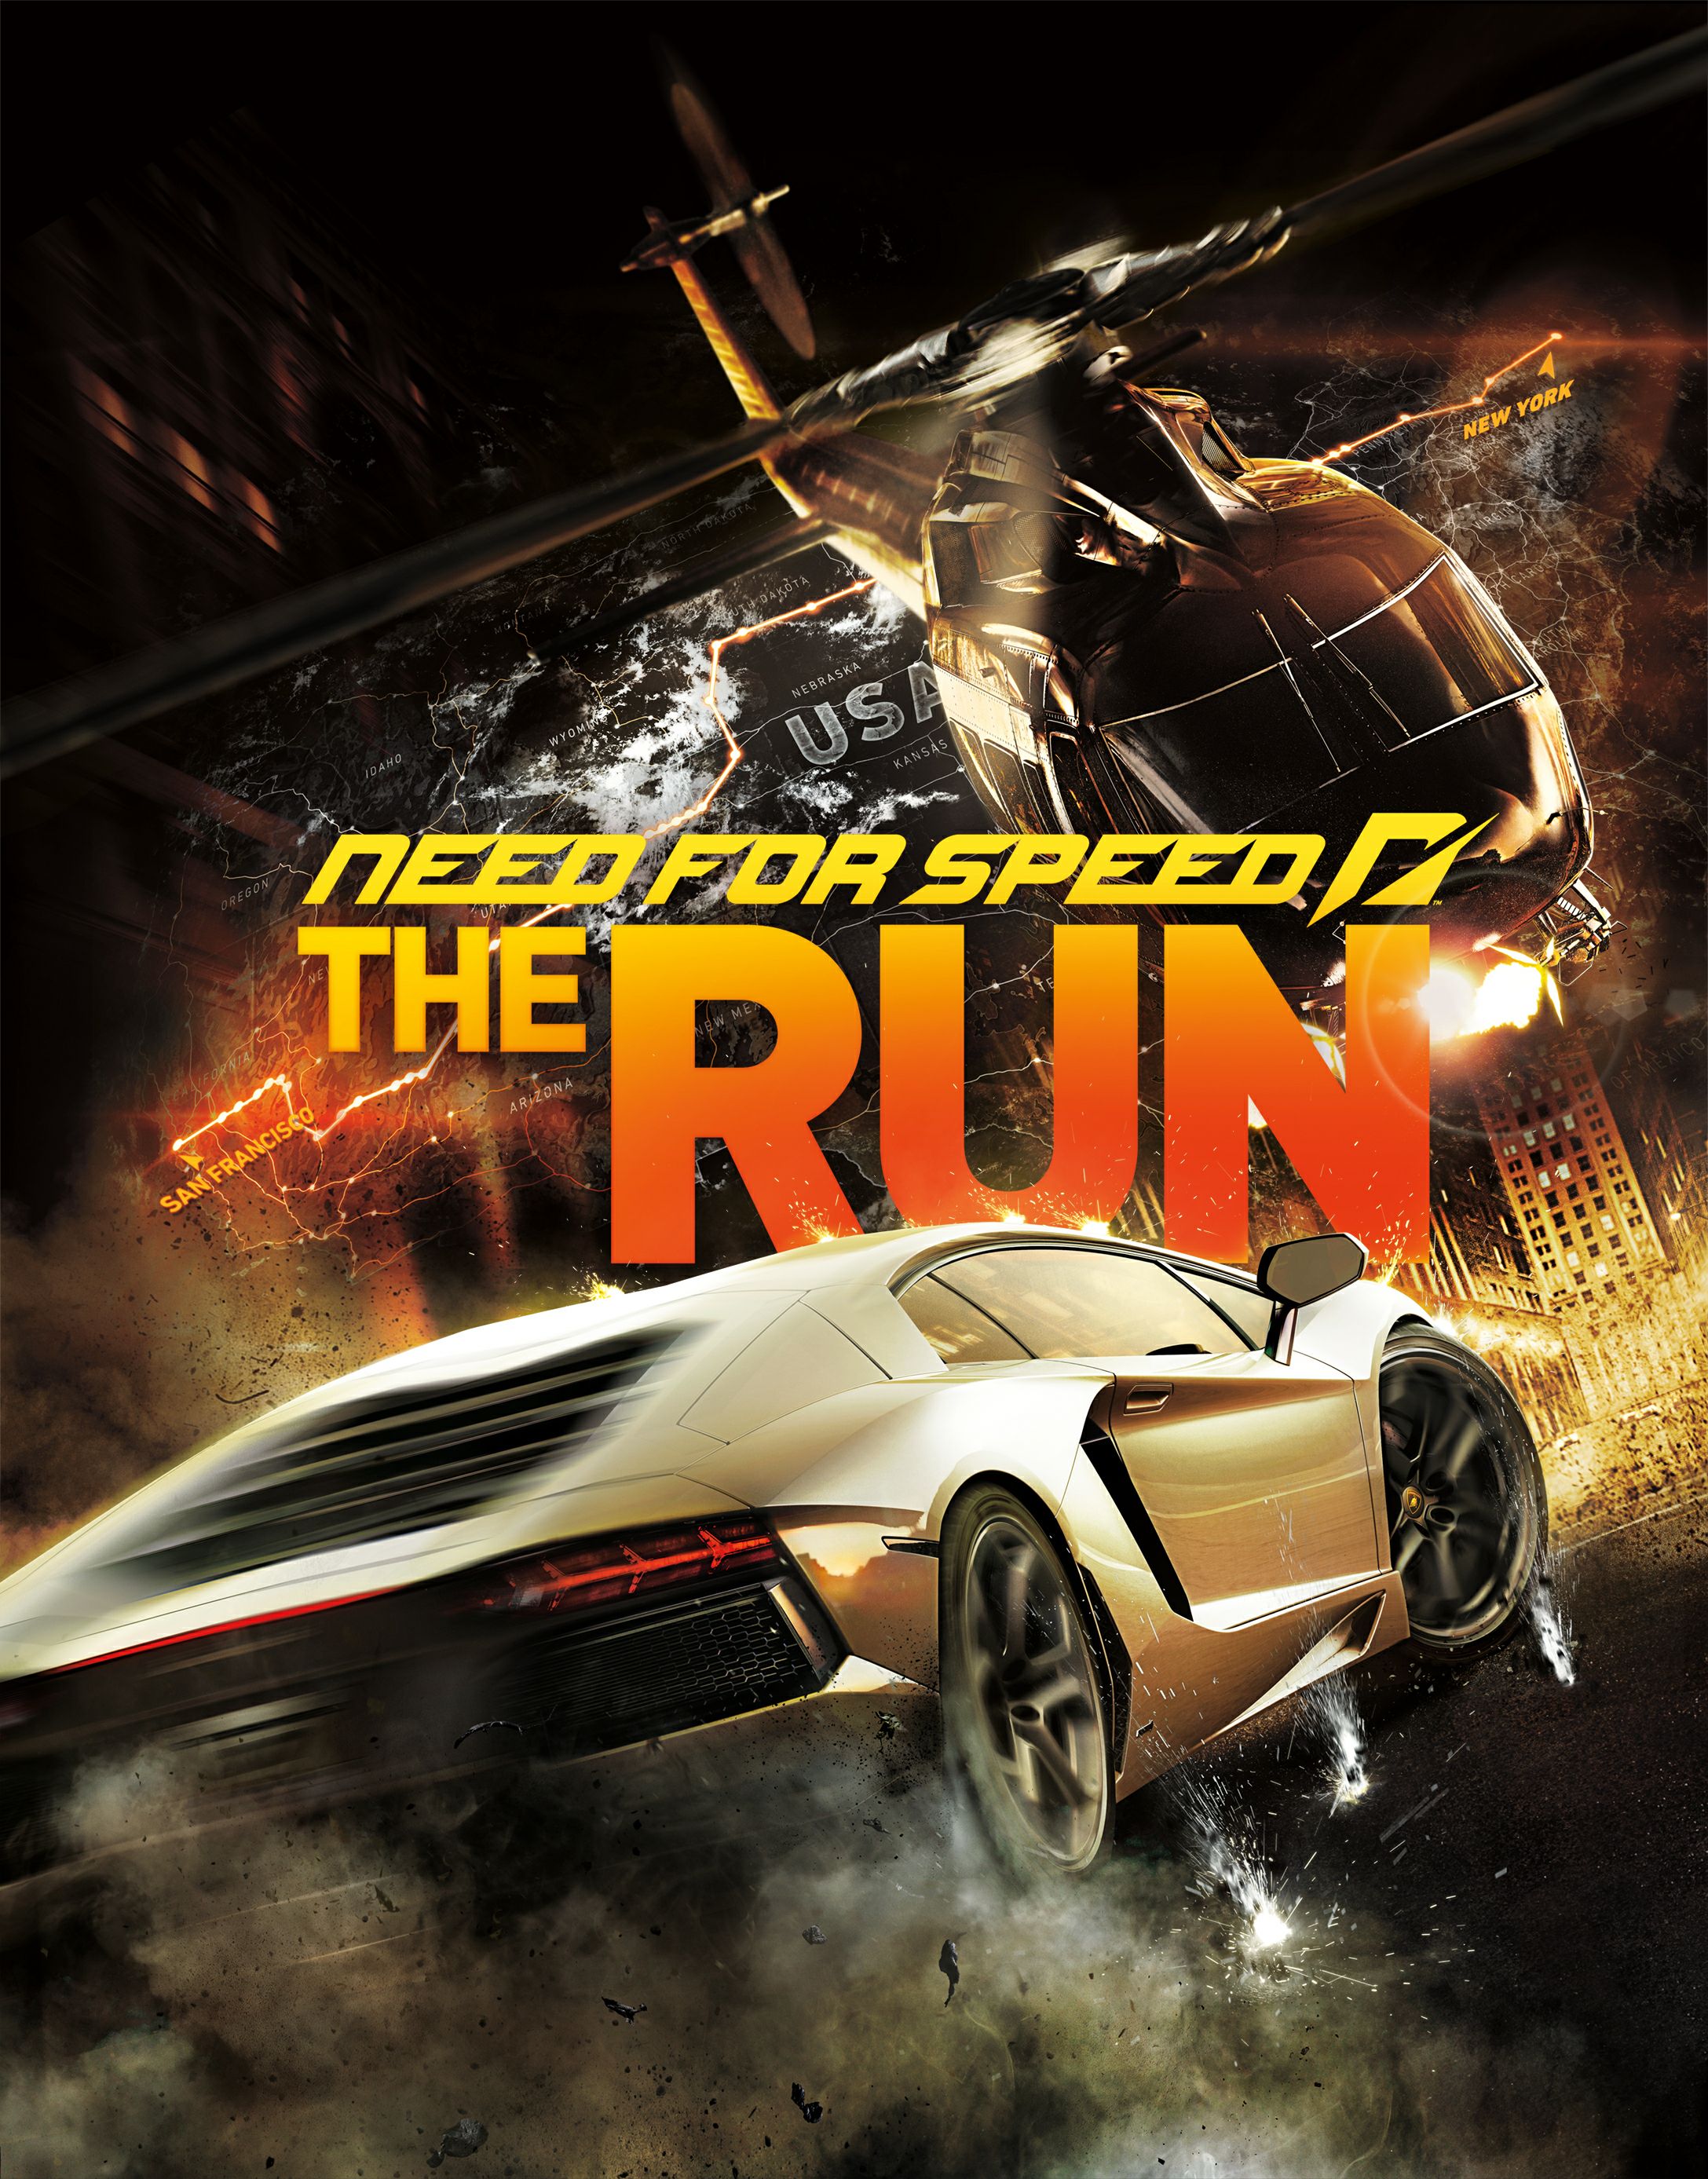 Need for Speed: The Run screenshots, image and picture